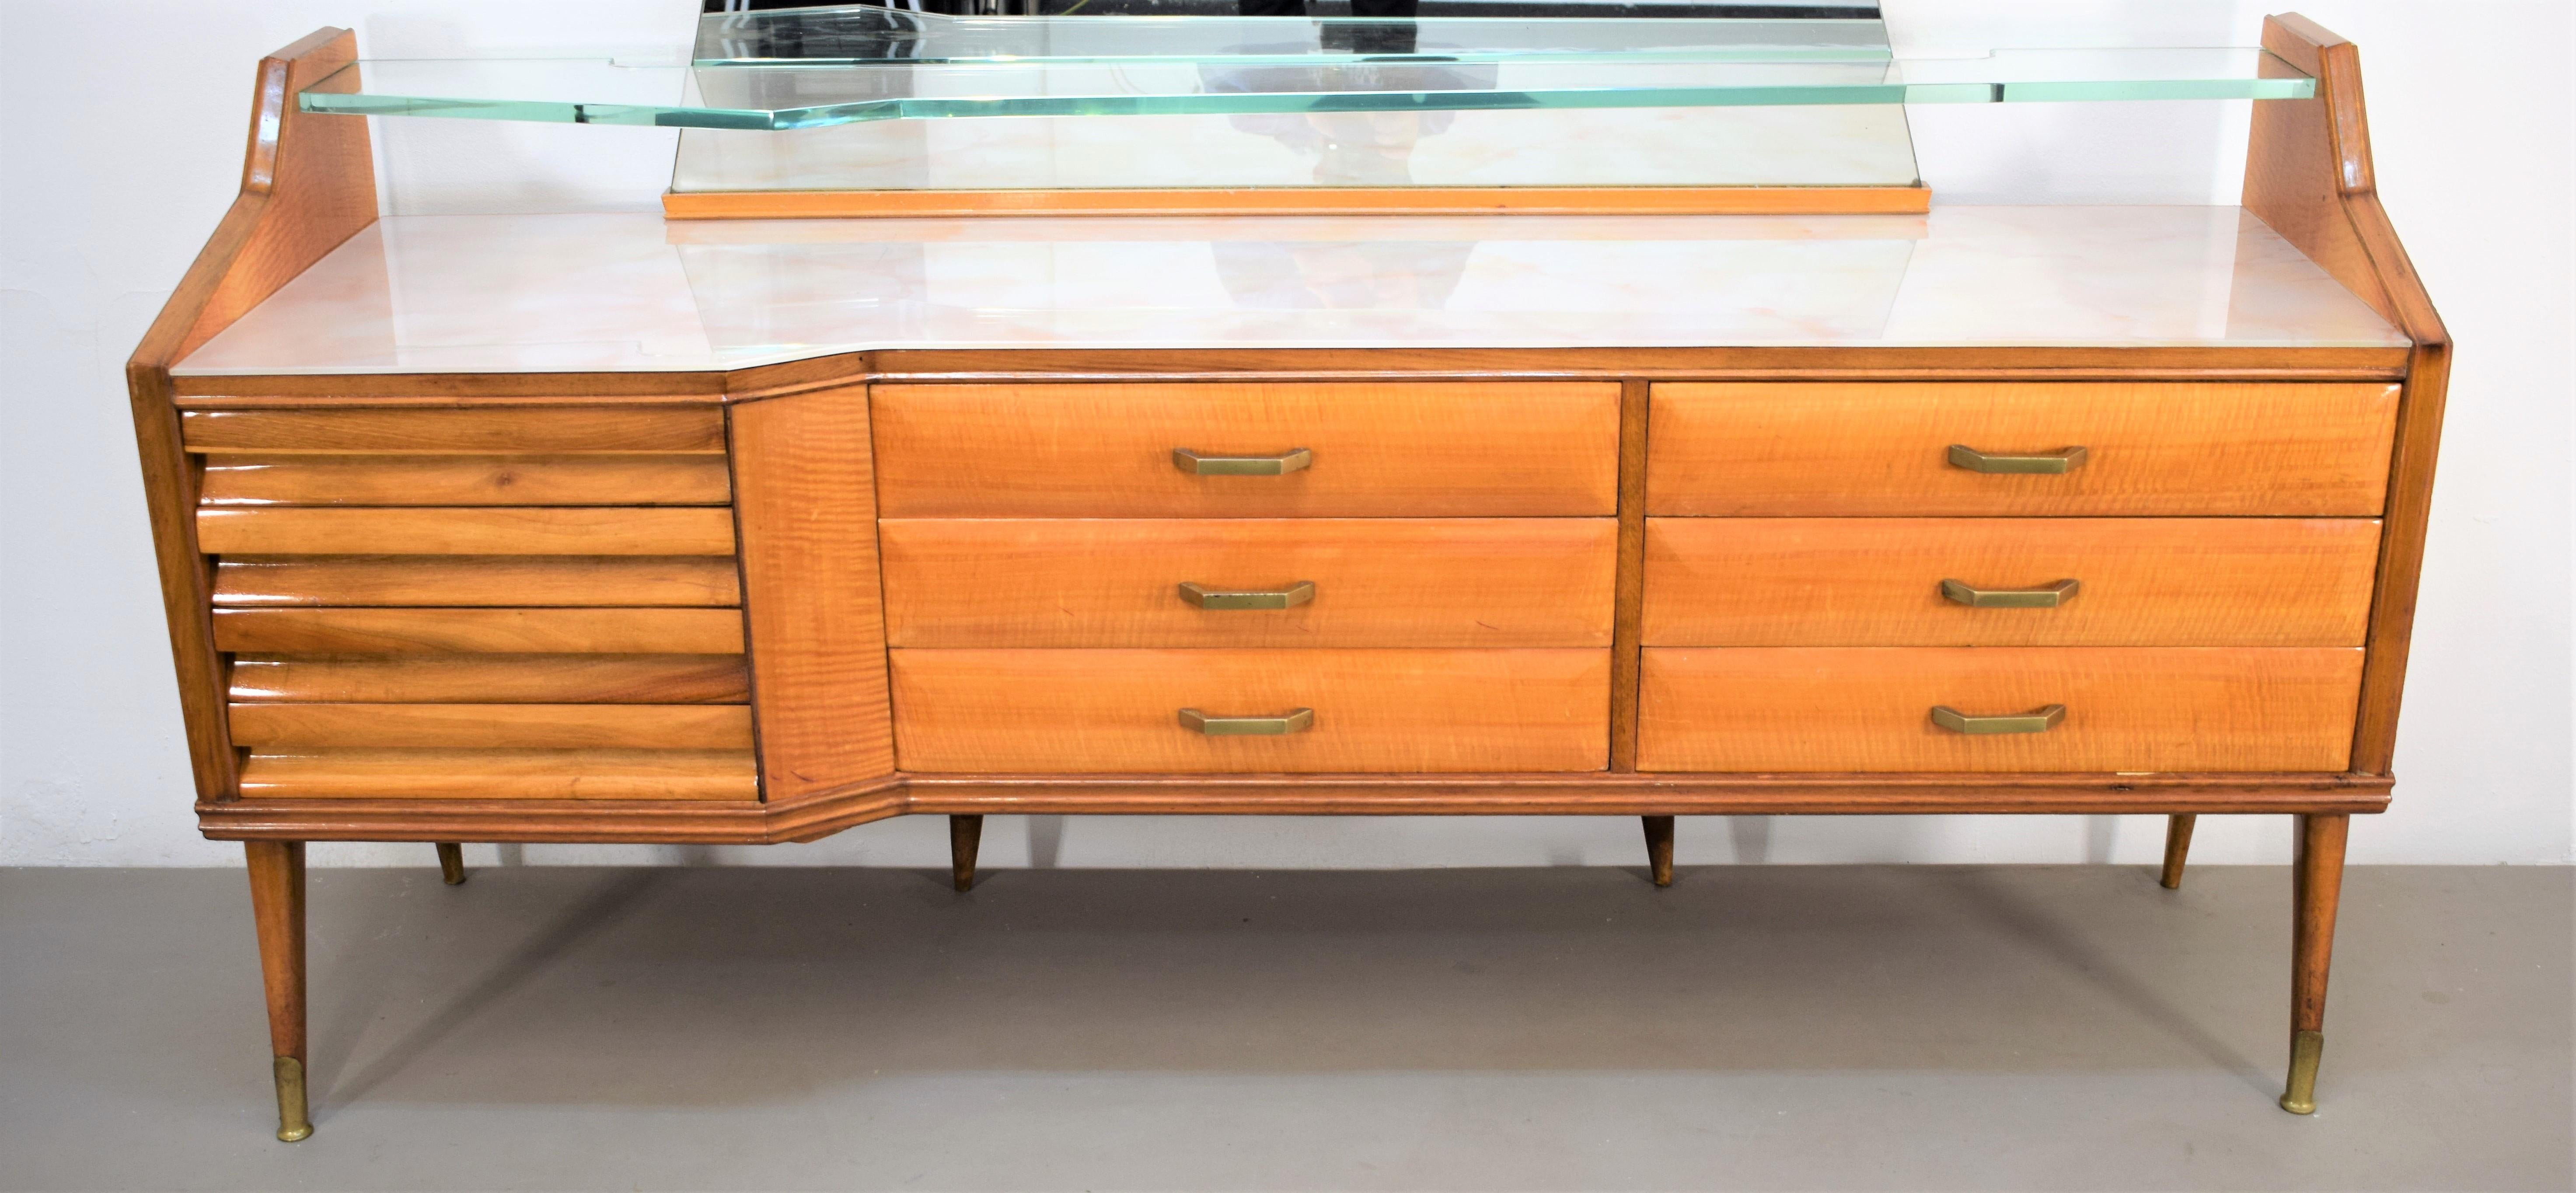 Italian chest of drawers with mirror, 1950s.
 Dimensions: H tot.=189 cm; W= 178 cm; D= 53 cm
H only dressers= 85 cm.